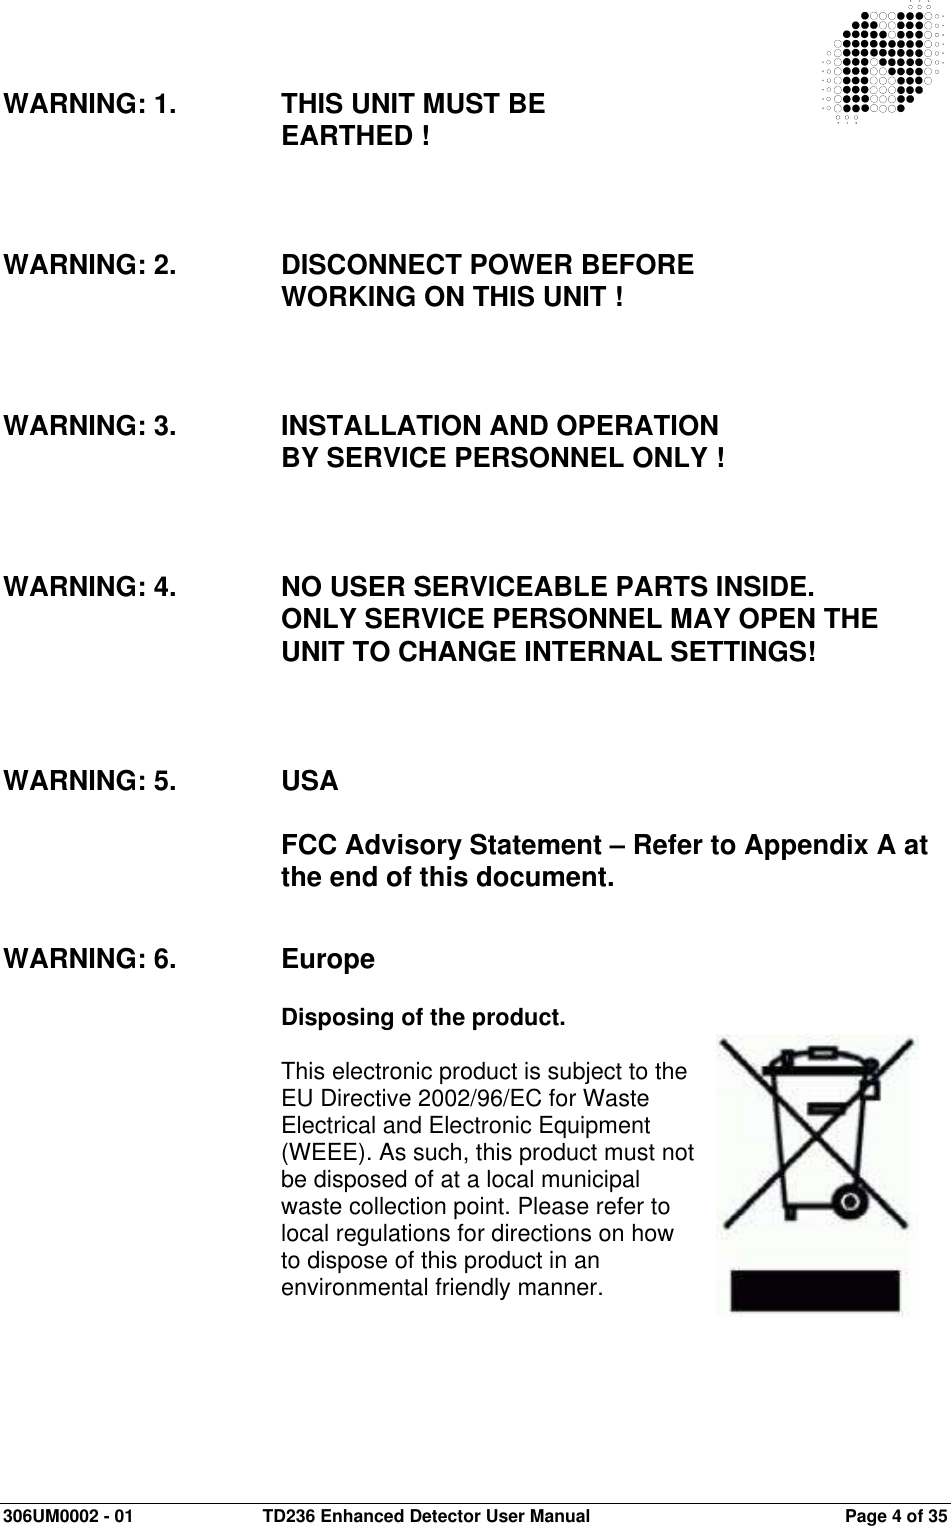  306UM0002 - 01  TD236 Enhanced Detector User Manual   Page 4 of 35   WARNING: 1.  THIS UNIT MUST BE  EARTHED !    WARNING: 2.  DISCONNECT POWER BEFORE  WORKING ON THIS UNIT !    WARNING: 3.  INSTALLATION AND OPERATION    BY SERVICE PERSONNEL ONLY !    WARNING: 4.  NO USER SERVICEABLE PARTS INSIDE.  ONLY SERVICE PERSONNEL MAY OPEN THE UNIT TO CHANGE INTERNAL SETTINGS!    WARNING: 5.  USA  FCC Advisory Statement – Refer to Appendix A at the end of this document.   WARNING: 6. Europe  Disposing of the product.  This electronic product is subject to the EU Directive 2002/96/EC for Waste Electrical and Electronic Equipment (WEEE). As such, this product must not be disposed of at a local municipal waste collection point. Please refer to local regulations for directions on how to dispose of this product in an environmental friendly manner.  